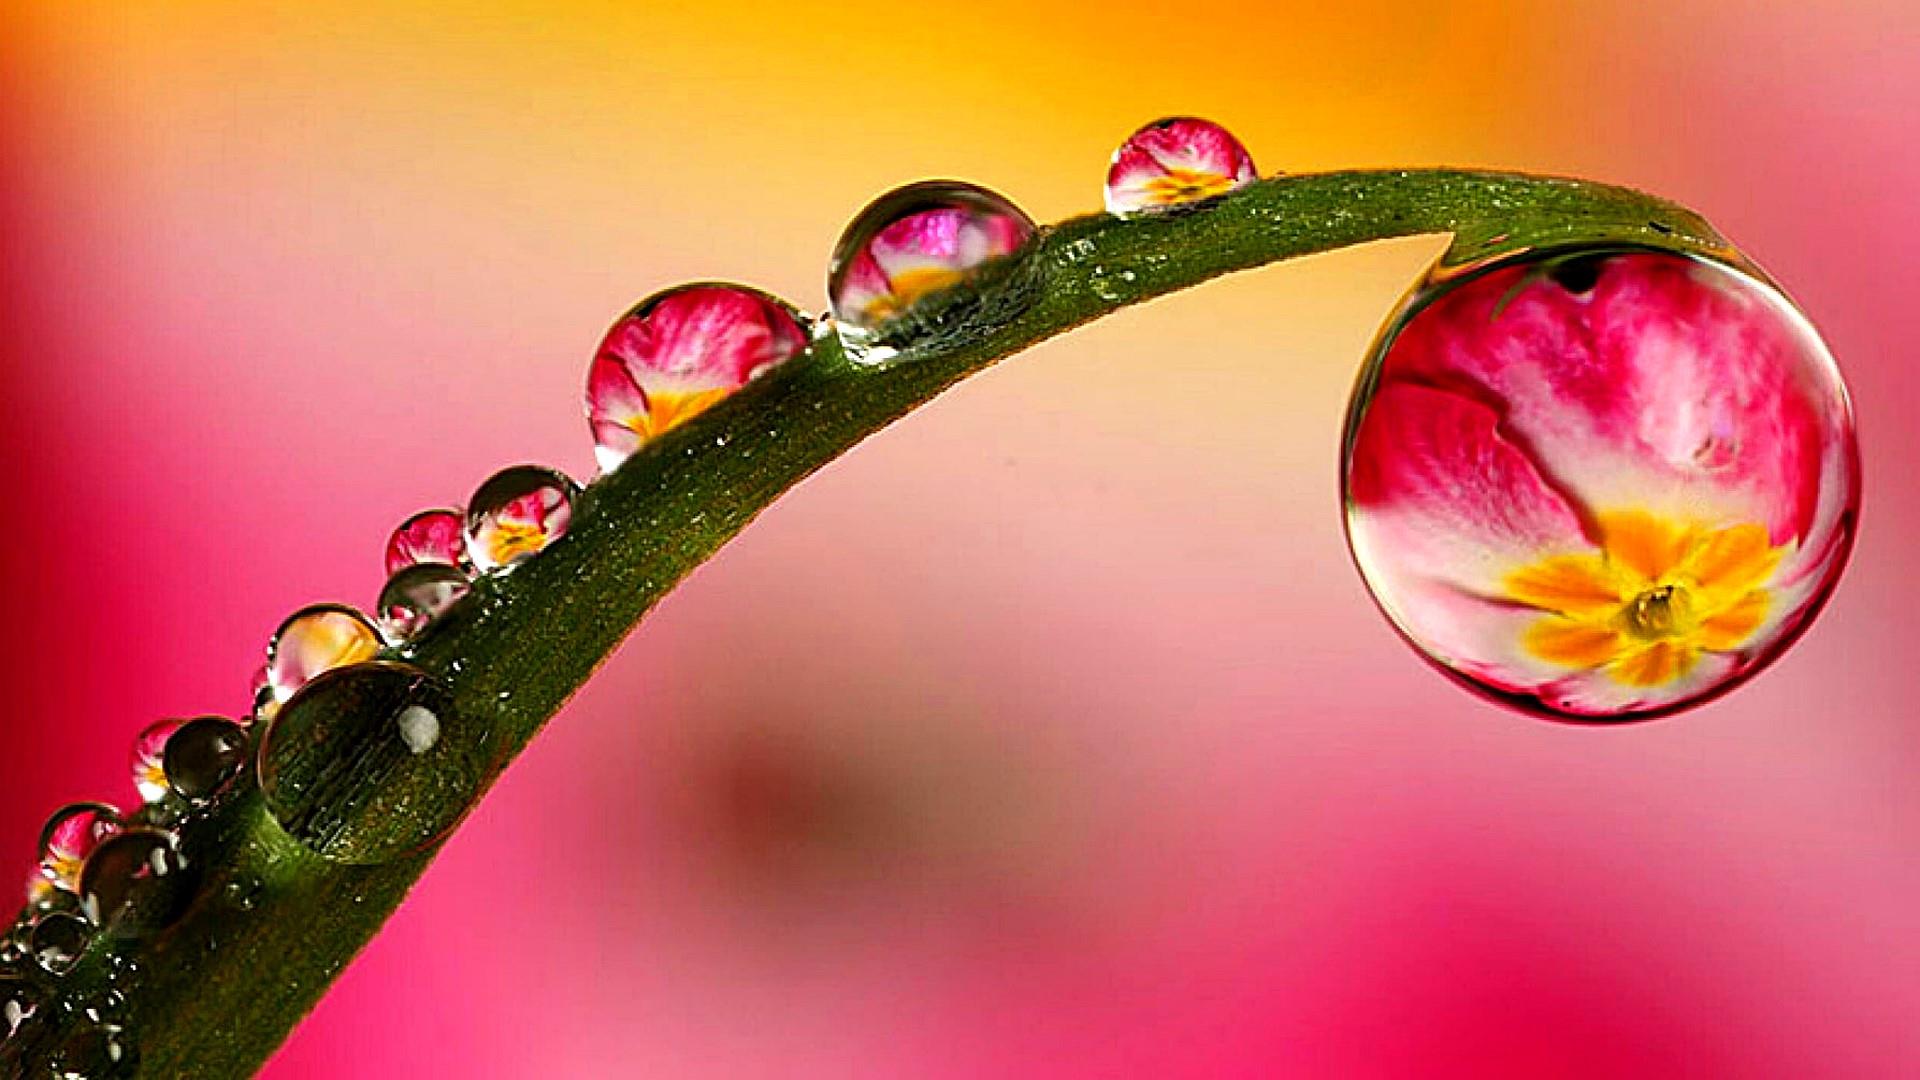 Drops Of Water On Green Leaf Macro Photography Hd Wallpapers For